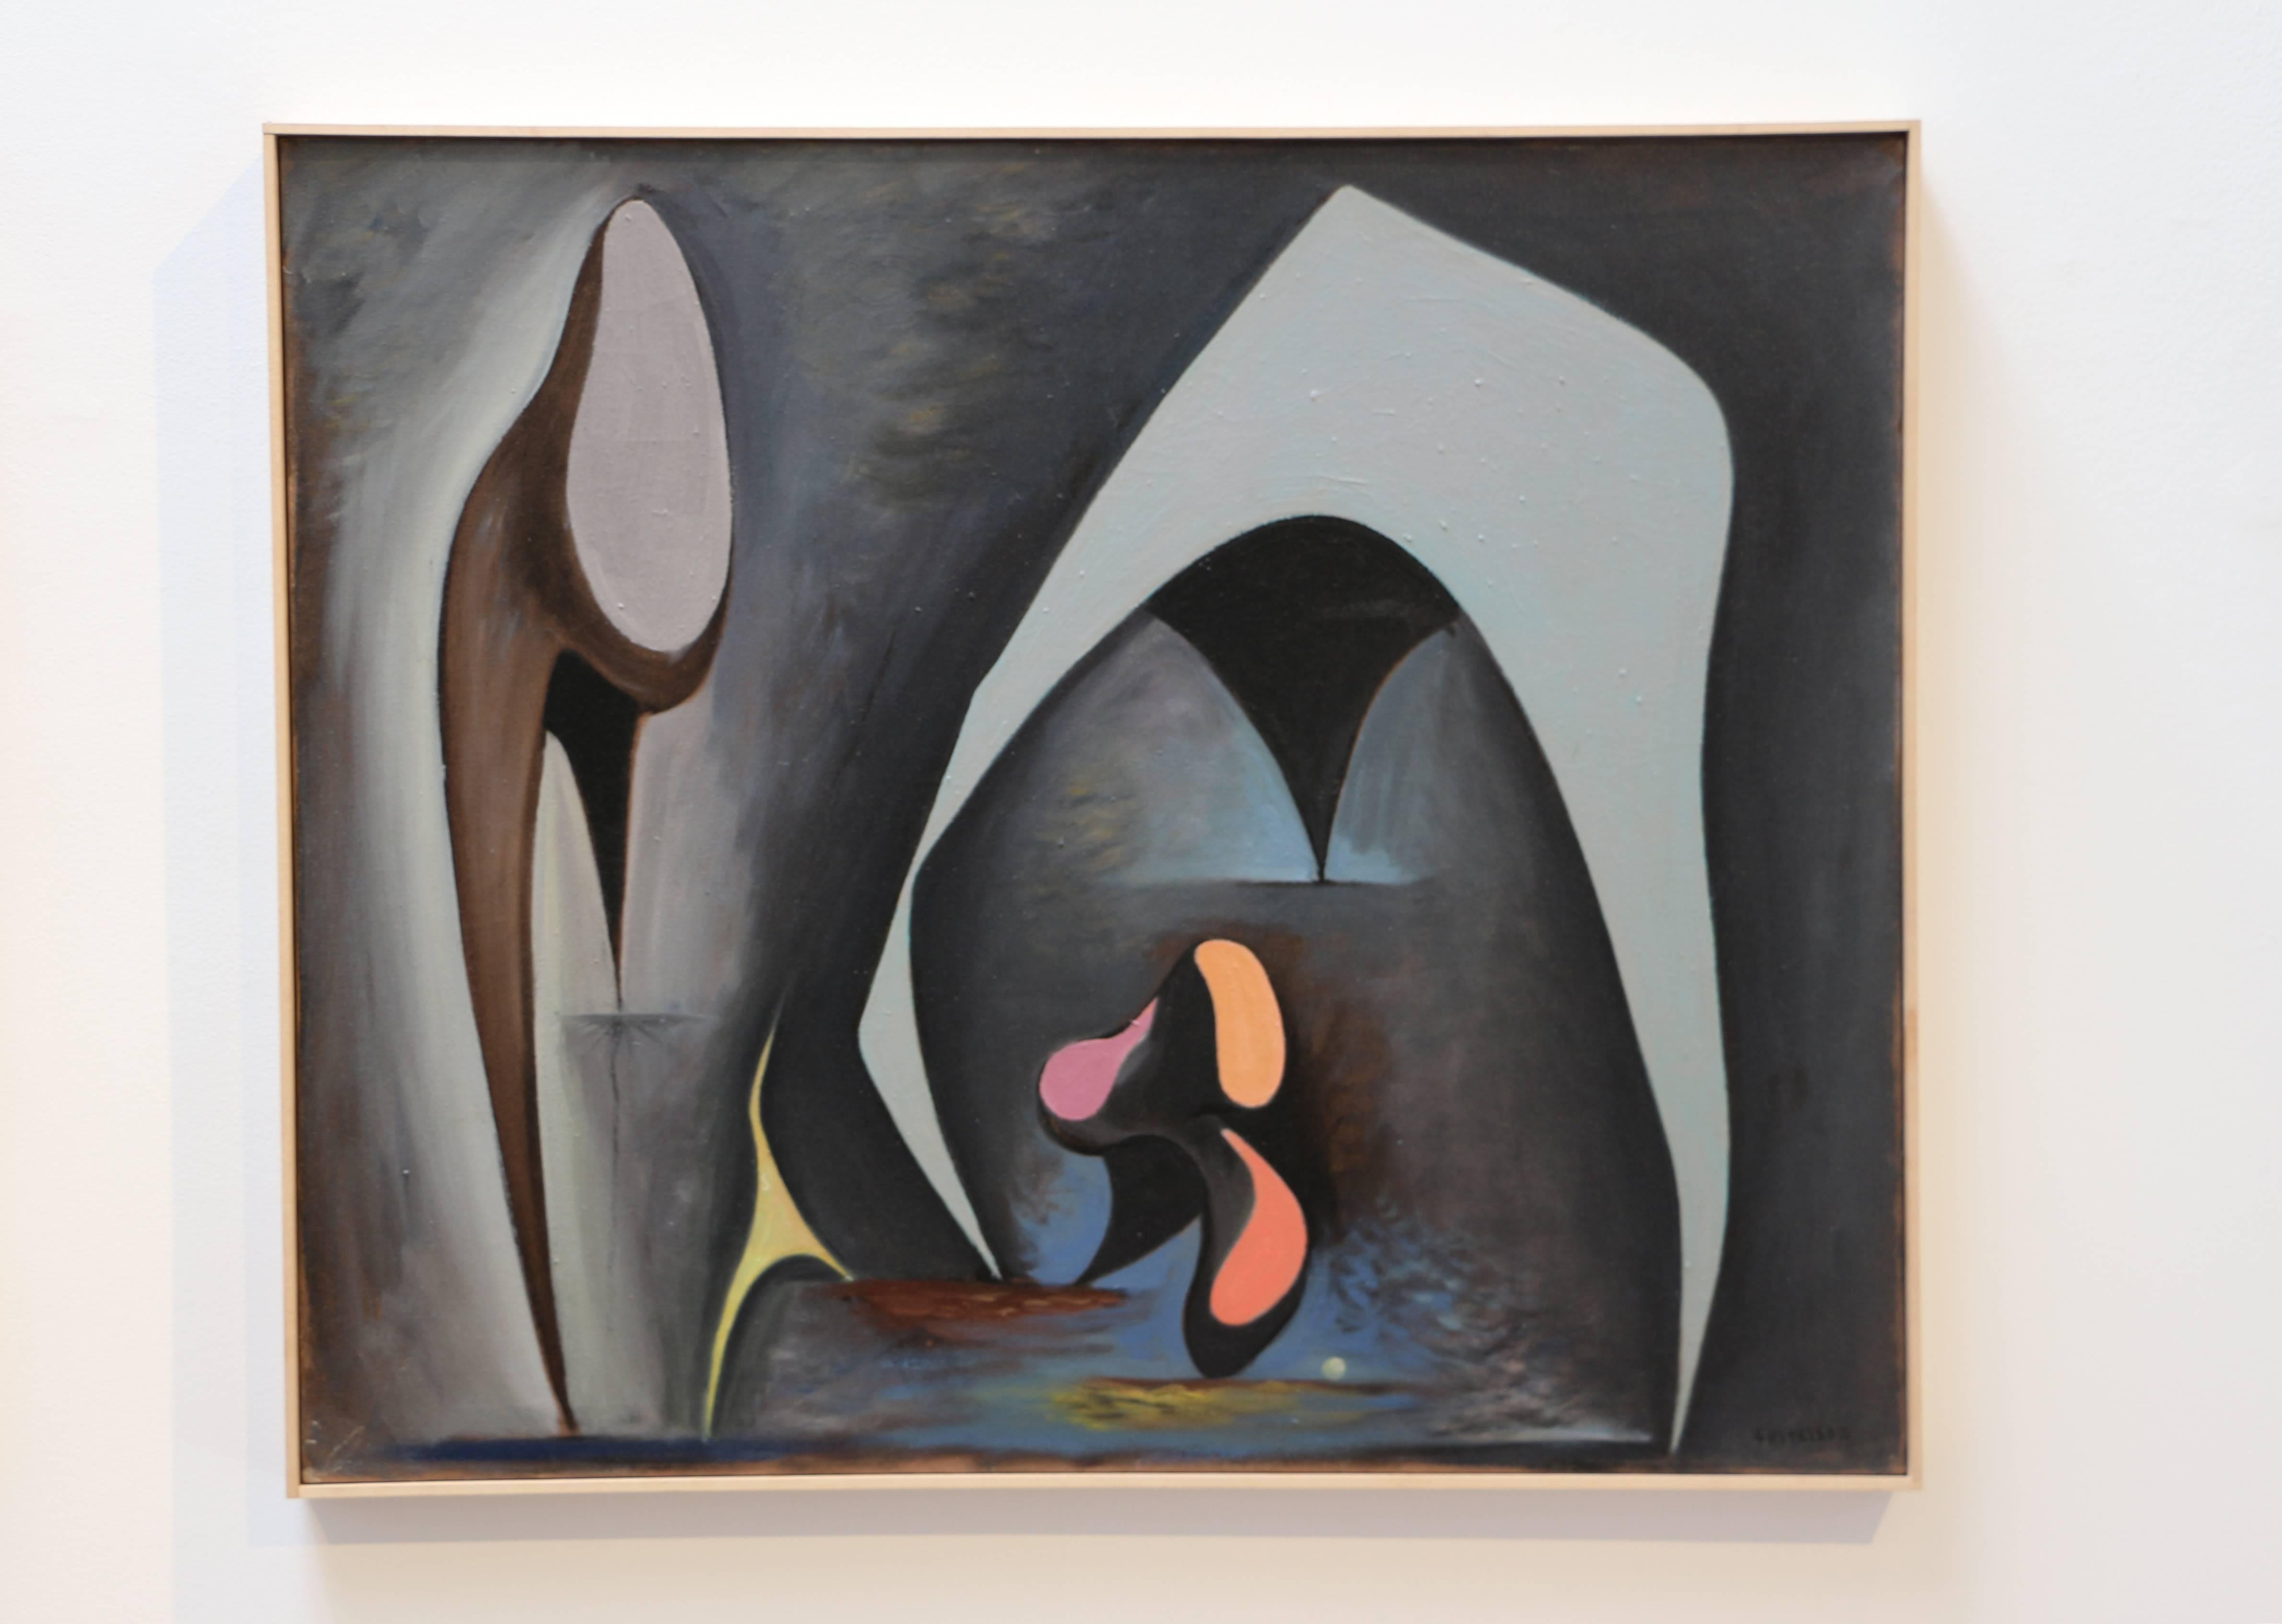 Magical Forms, abstract Post-Surreal oil painting of figures morphing to forms - Painting by Lorser Feitelson